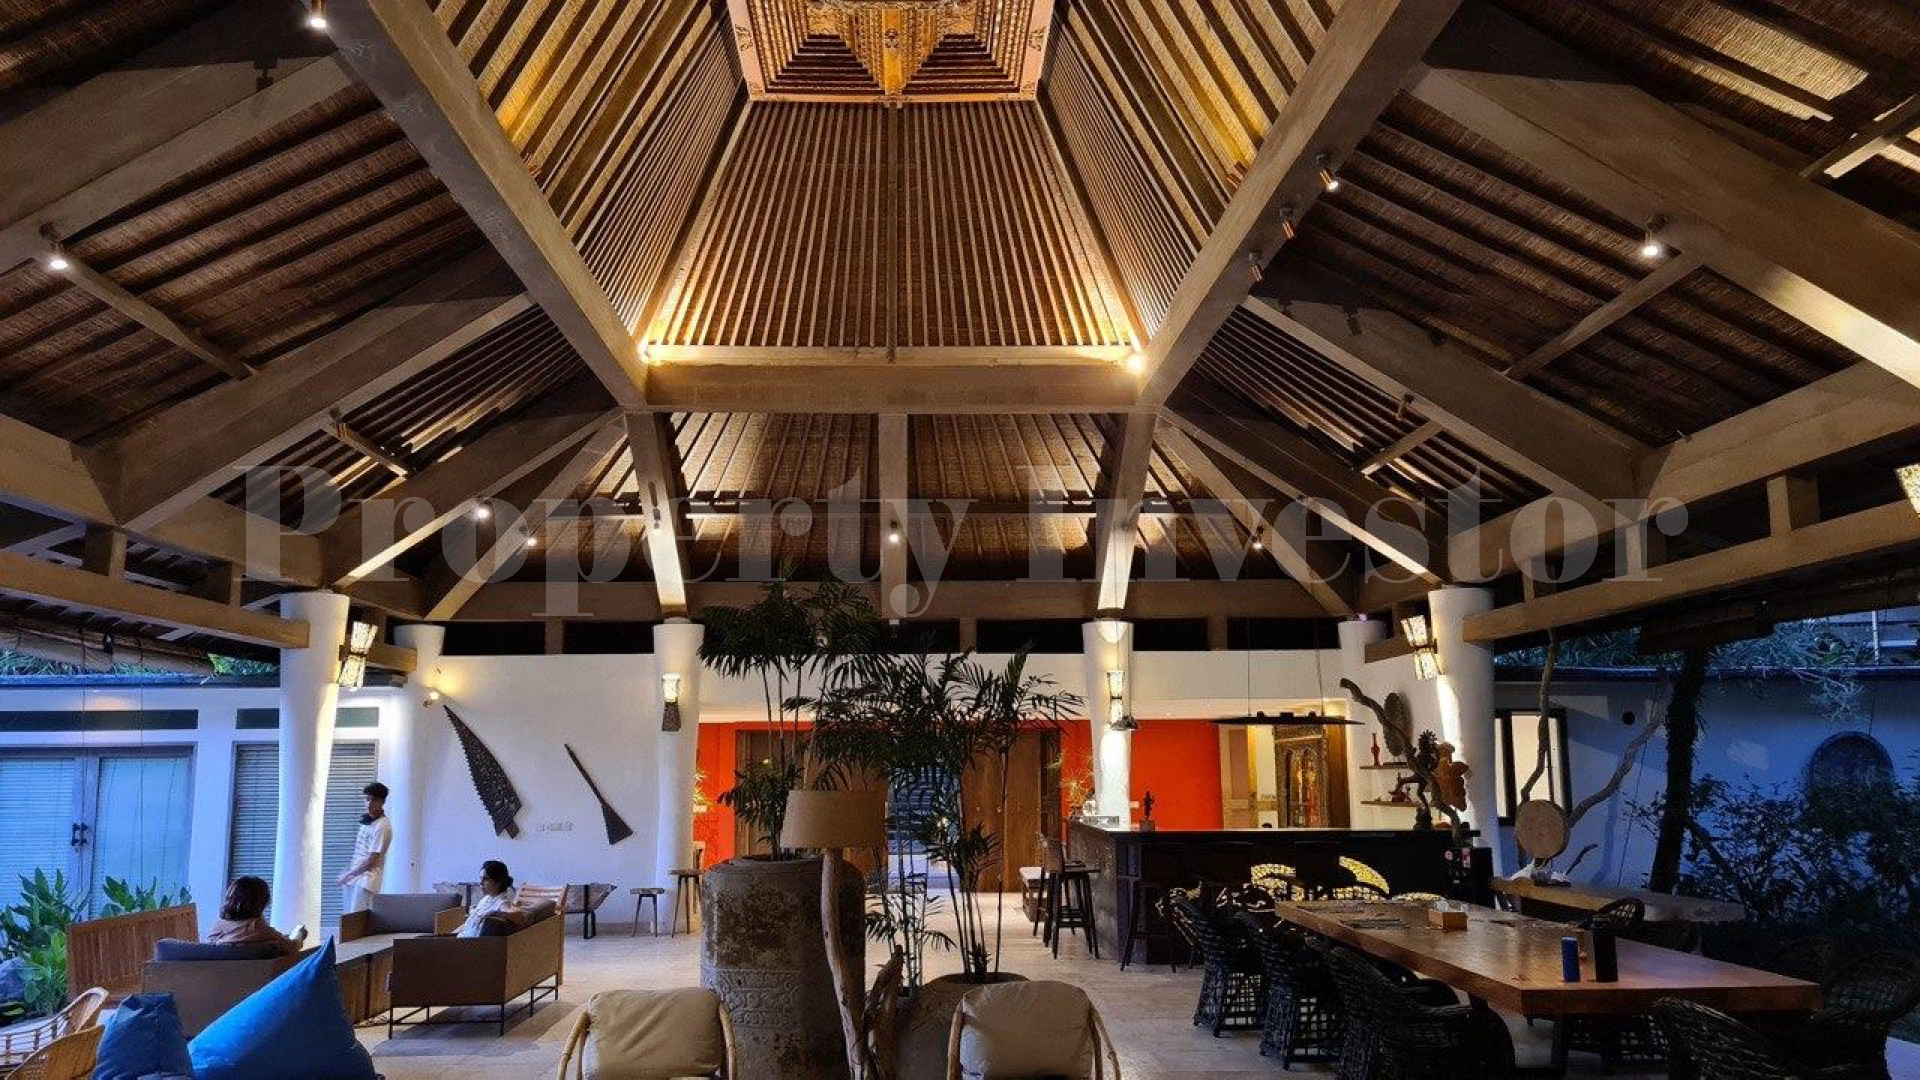 Exotic 4* Boutique Hotel & Spa with 26 Rooms & Villas in Ubud, Bali